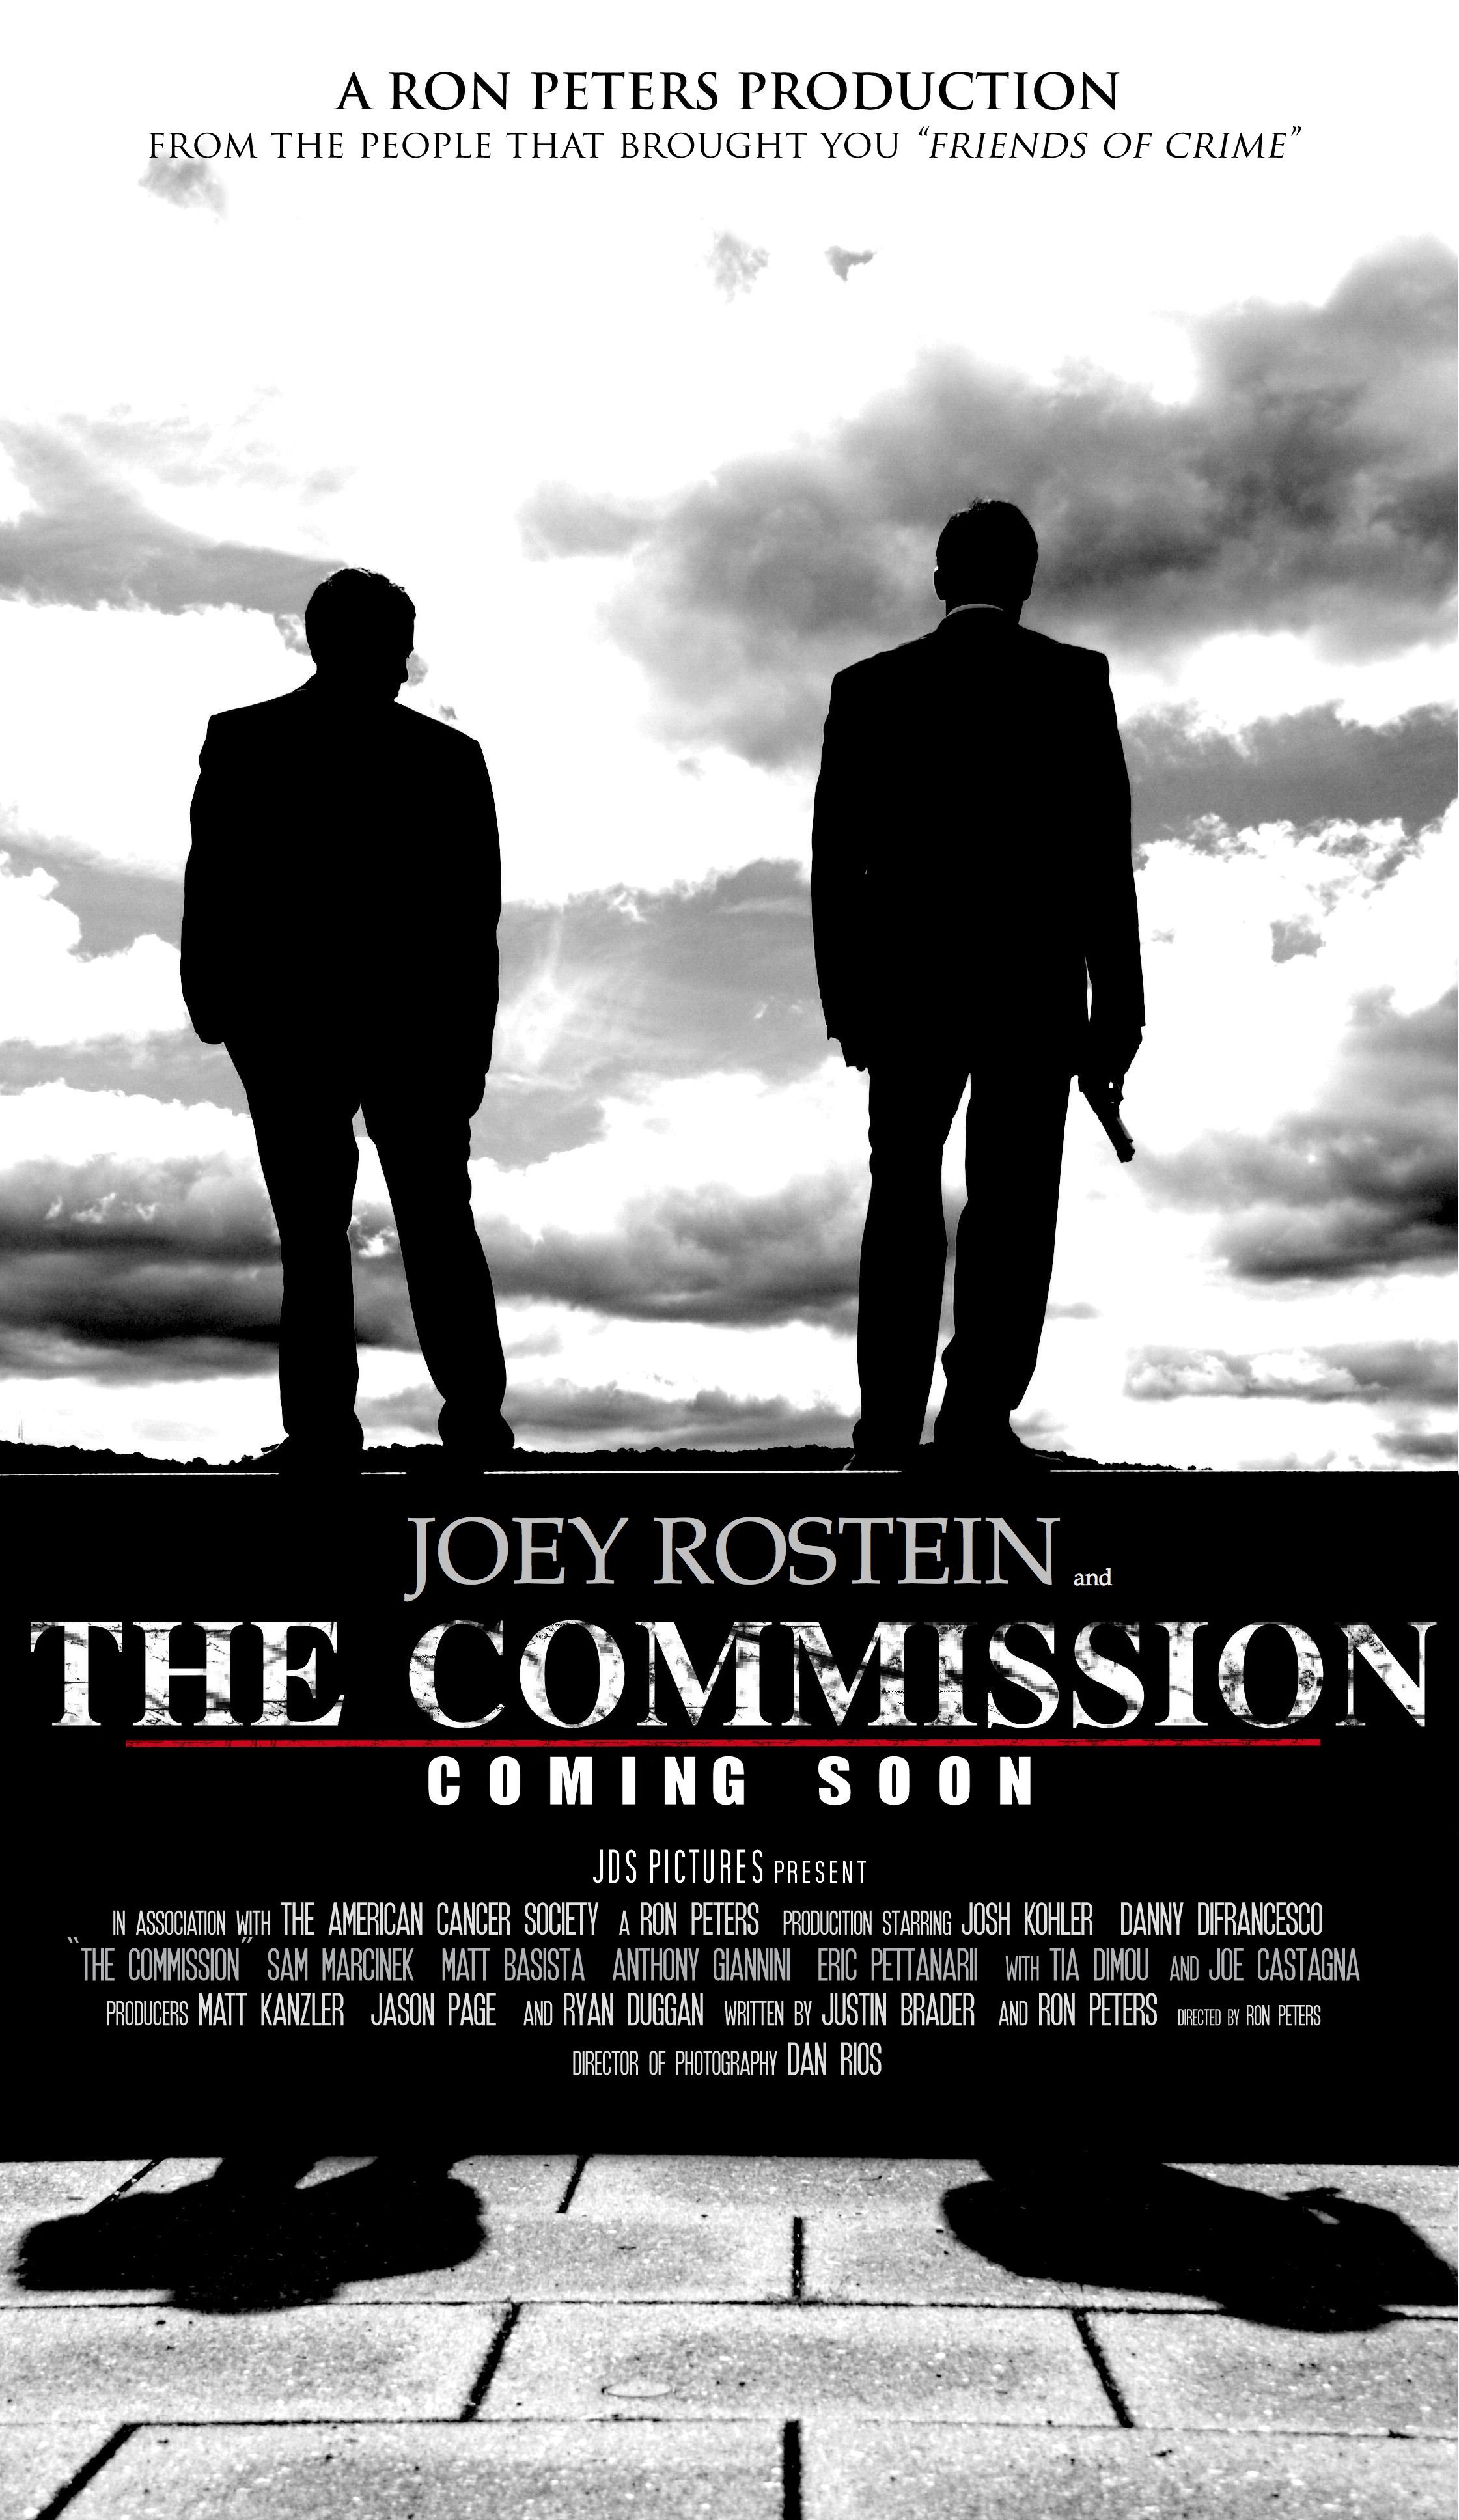 Josh Kohler and Dan DiFrancesco in Joey Rostein and the Commission (2008)